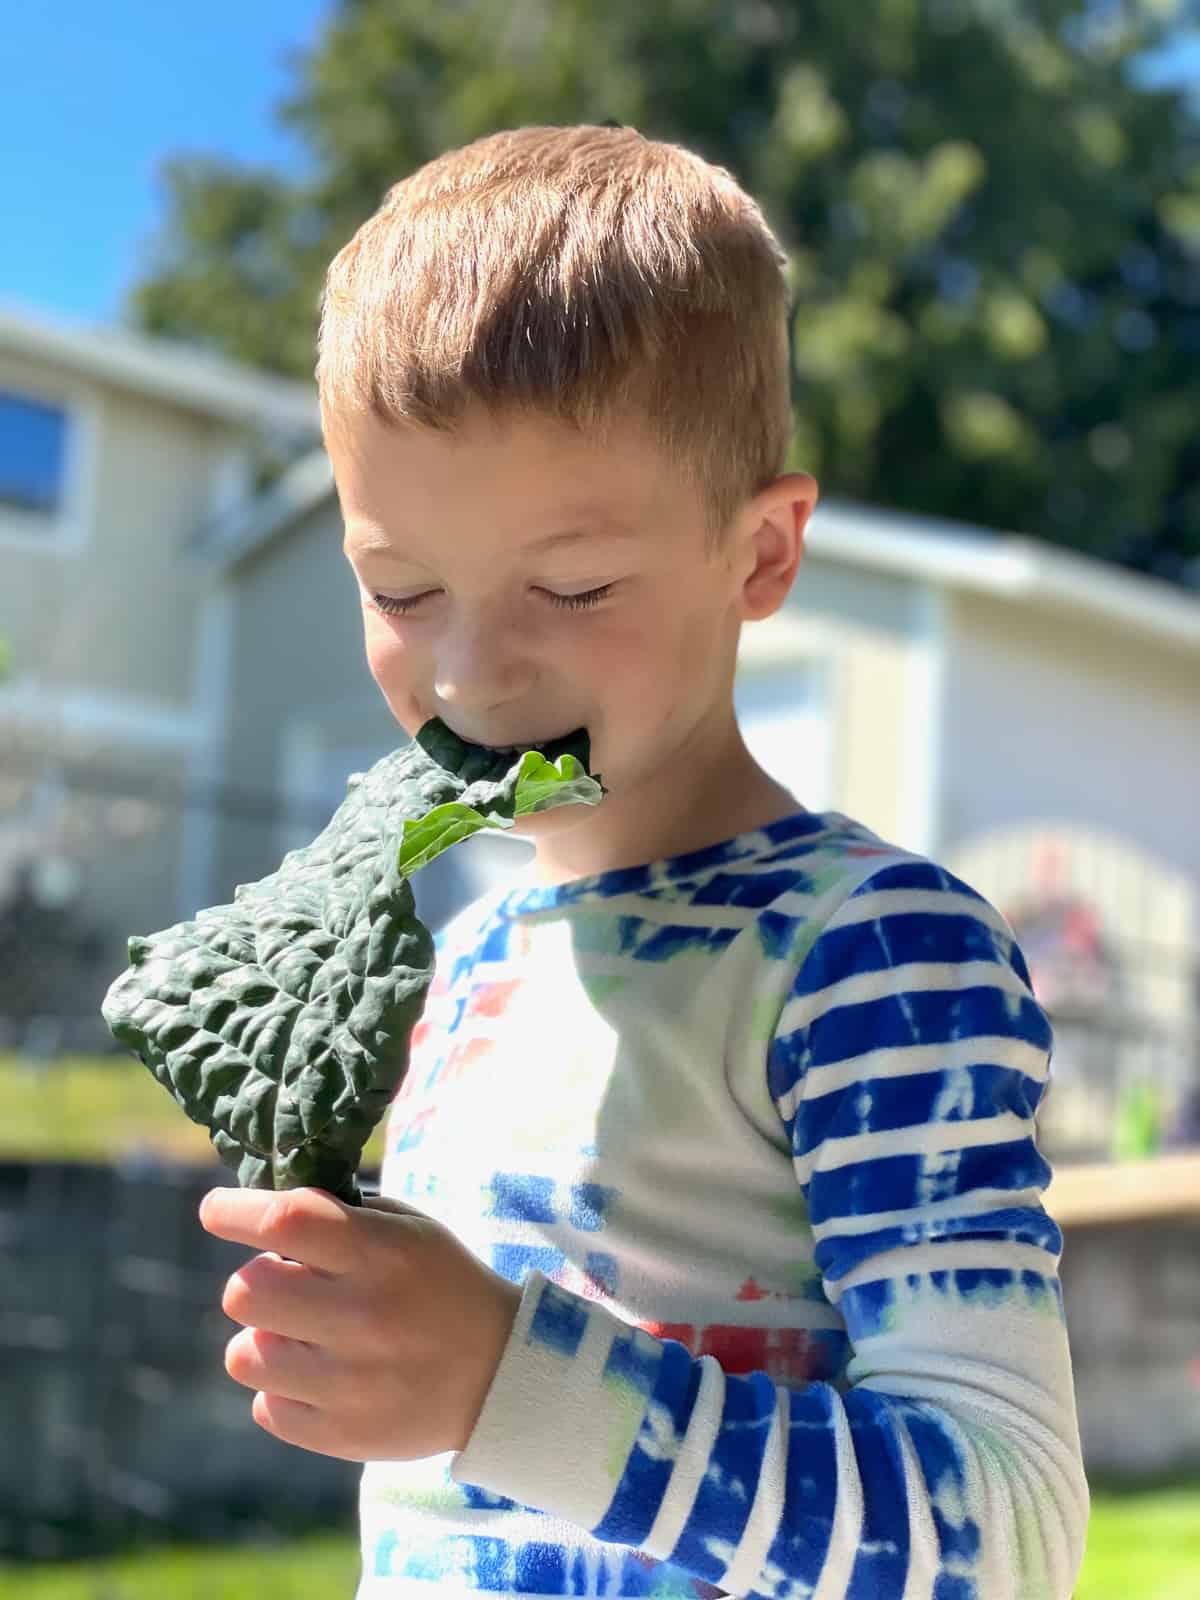 a kid eating a piece of kale.